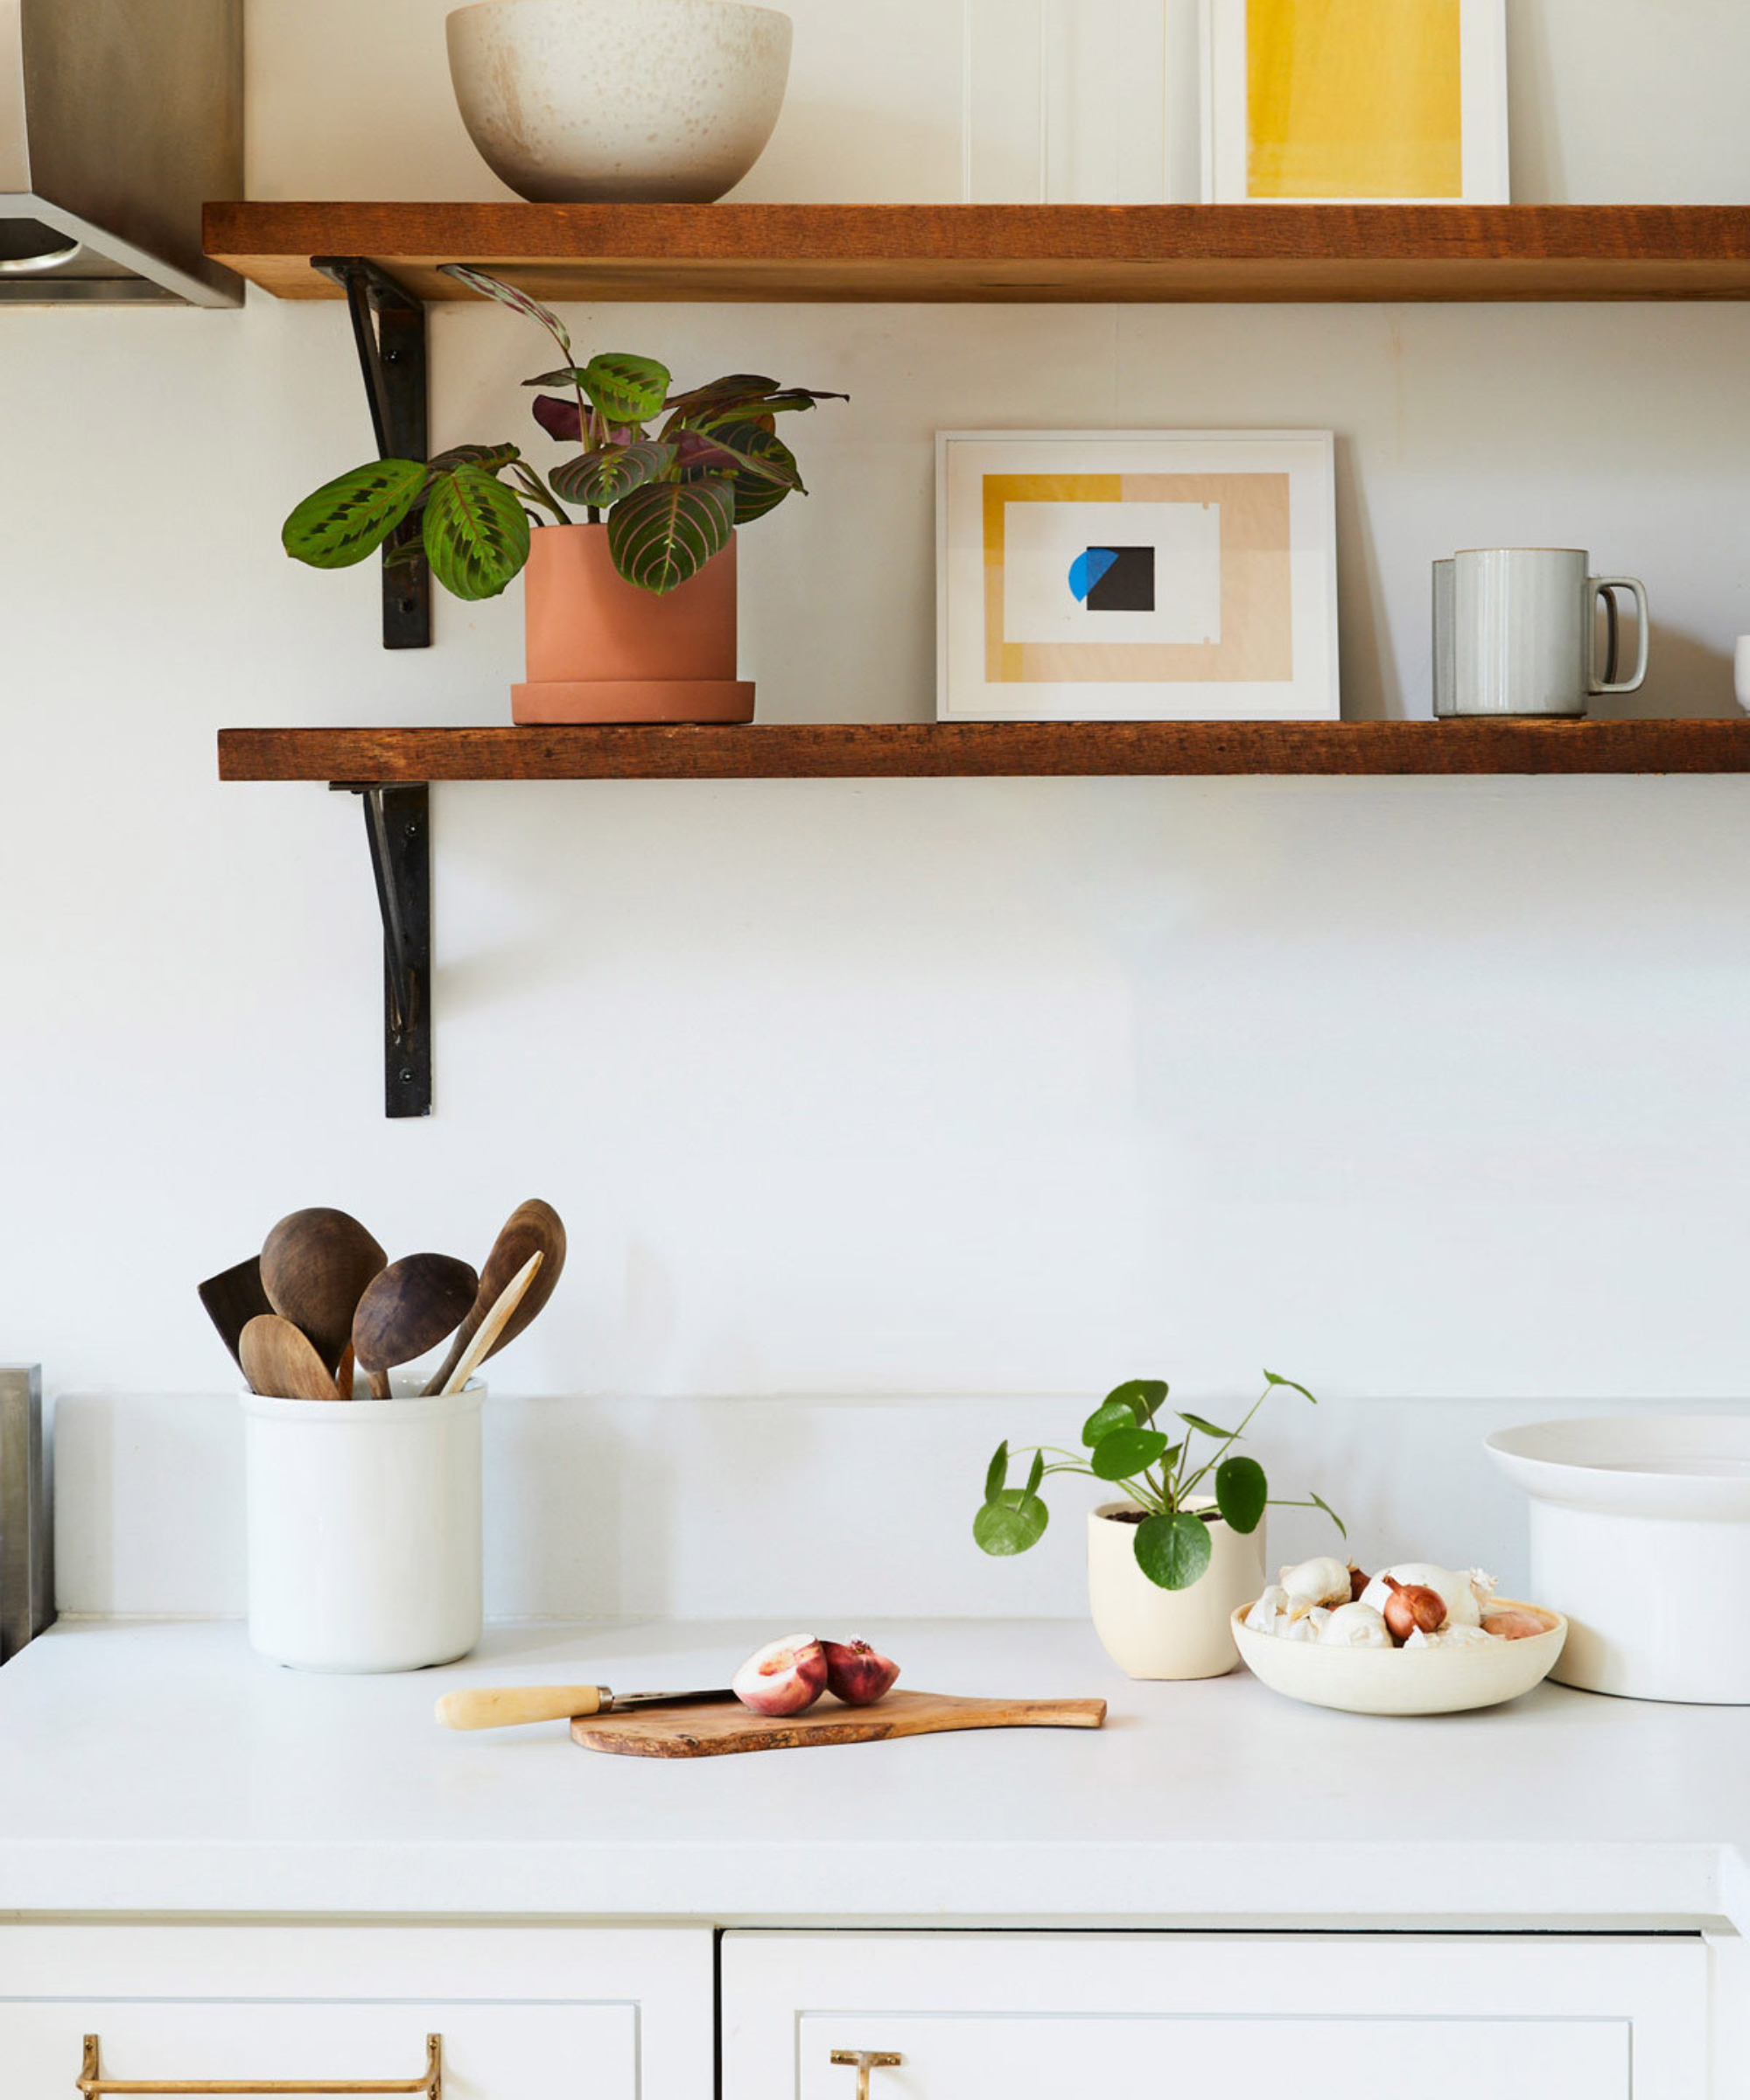 Chinese money plant on kitchen countertop with open shelving above